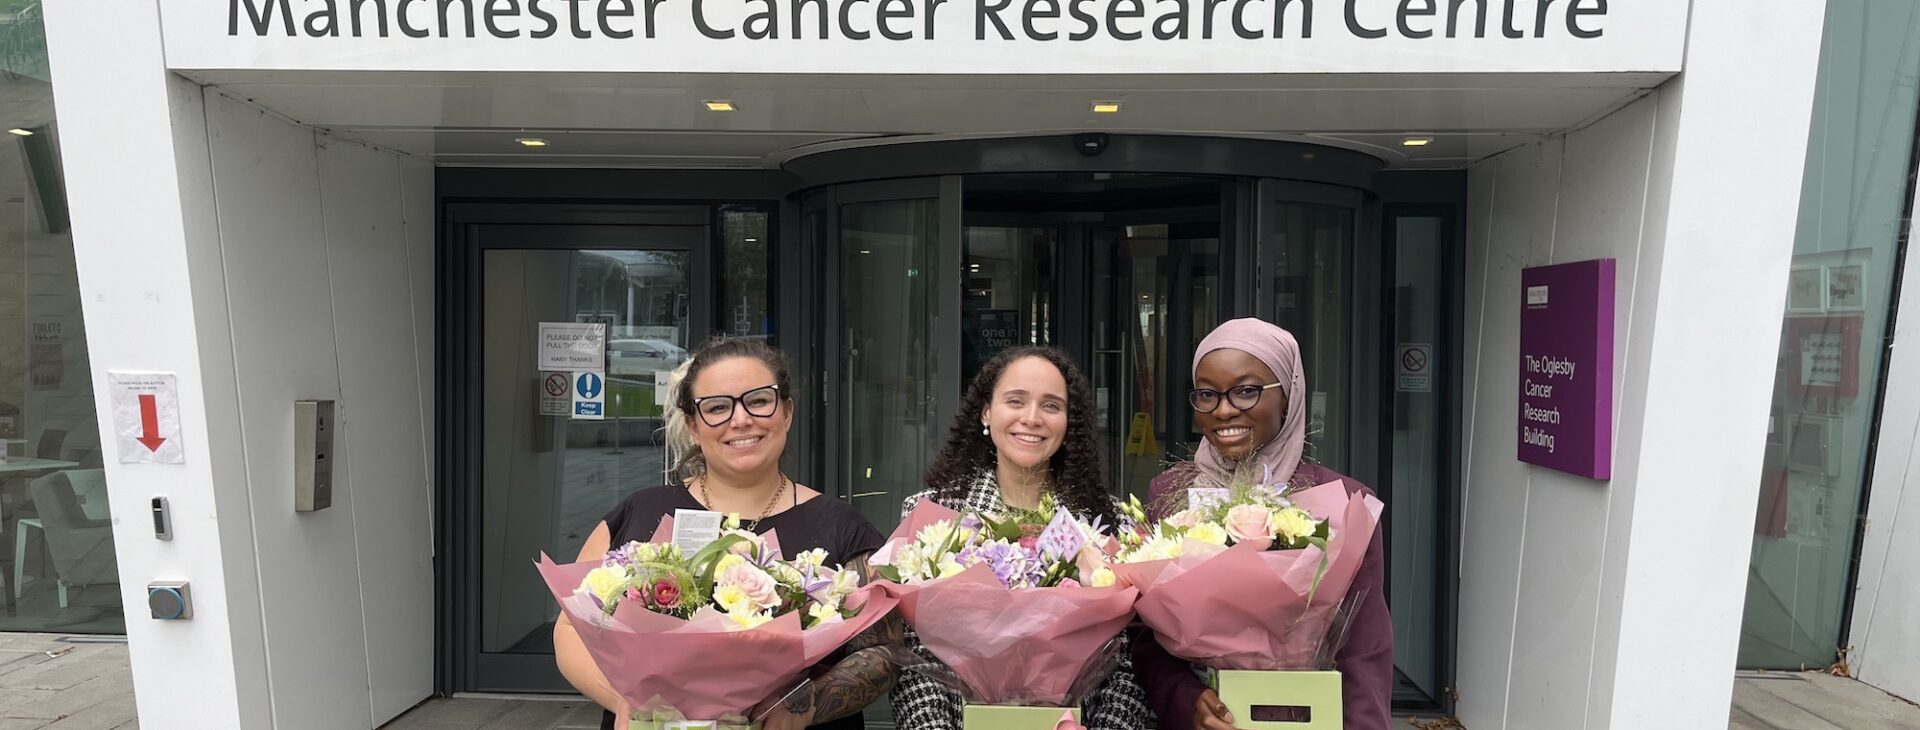 MB-PhD students in front of the OCRB in Manchester, Left to right: Macarena, Nadin, Hadiyat